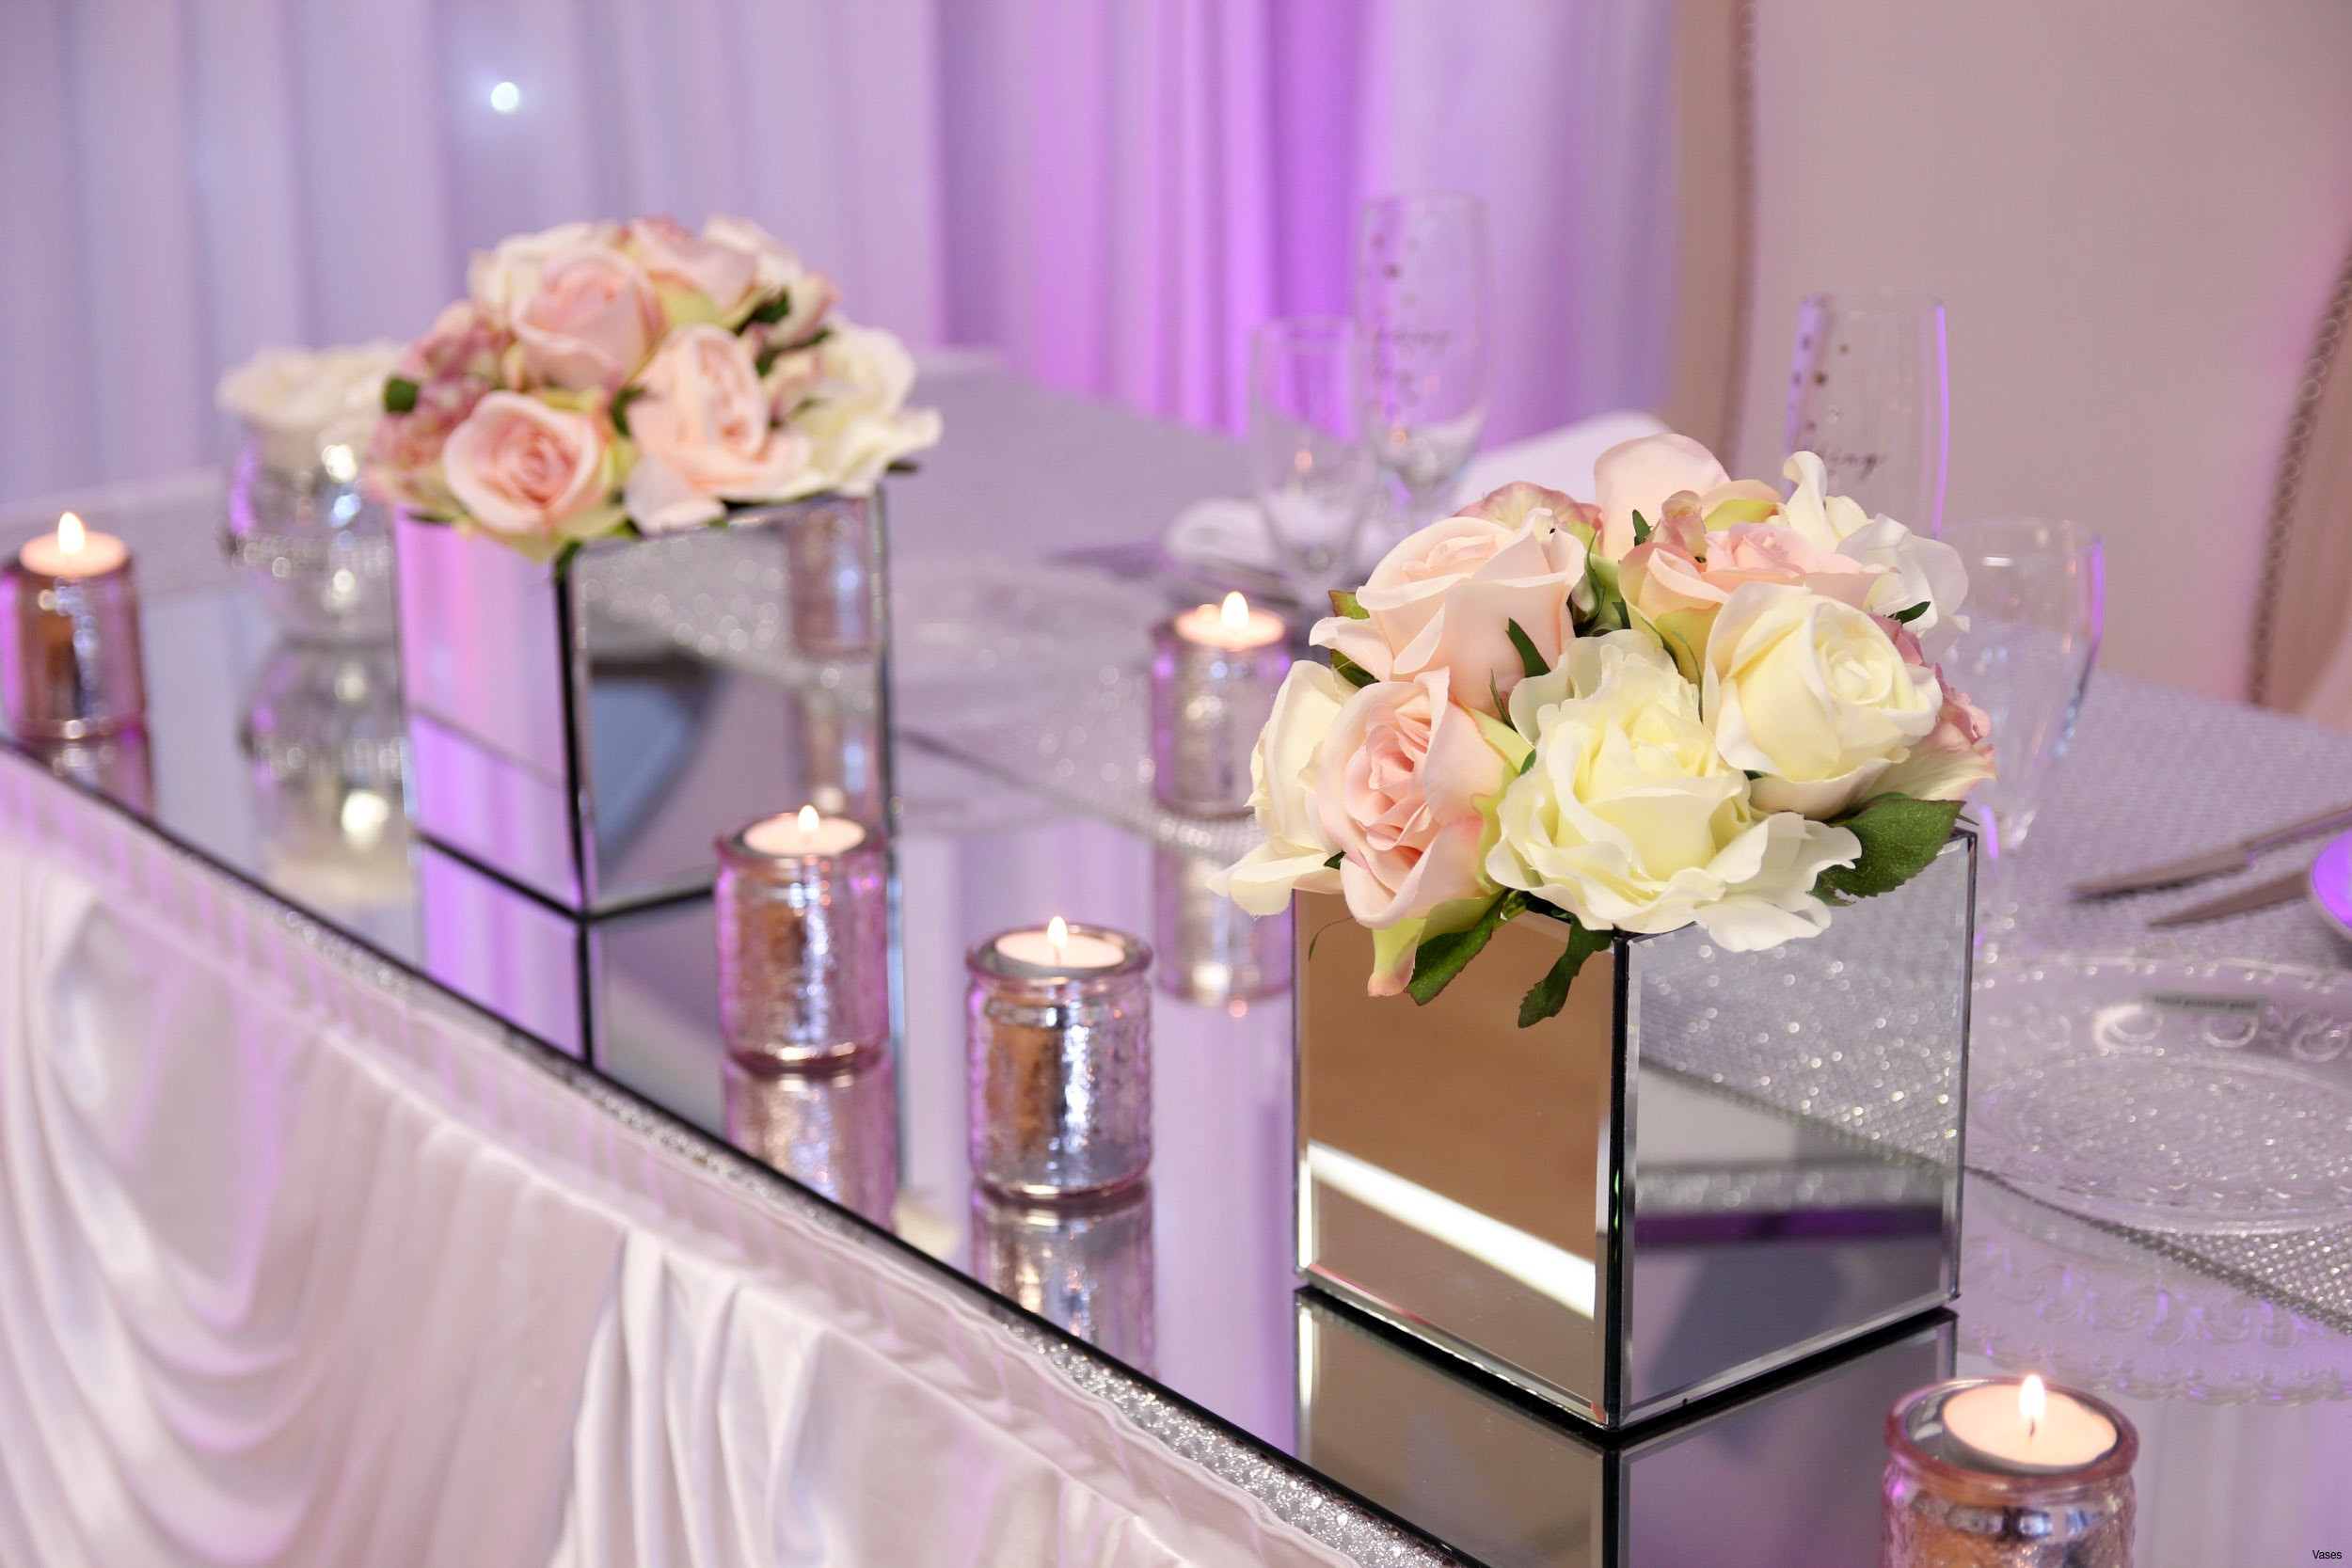 21 Lovable 3 Vase Centerpiece Ideas 2024 free download 3 vase centerpiece ideas of 3 vase centerpieces pics centerpiece decorations for weddings rate pertaining to 3 vase centerpieces pics centerpiece decorations for weddings rate mirrored squar